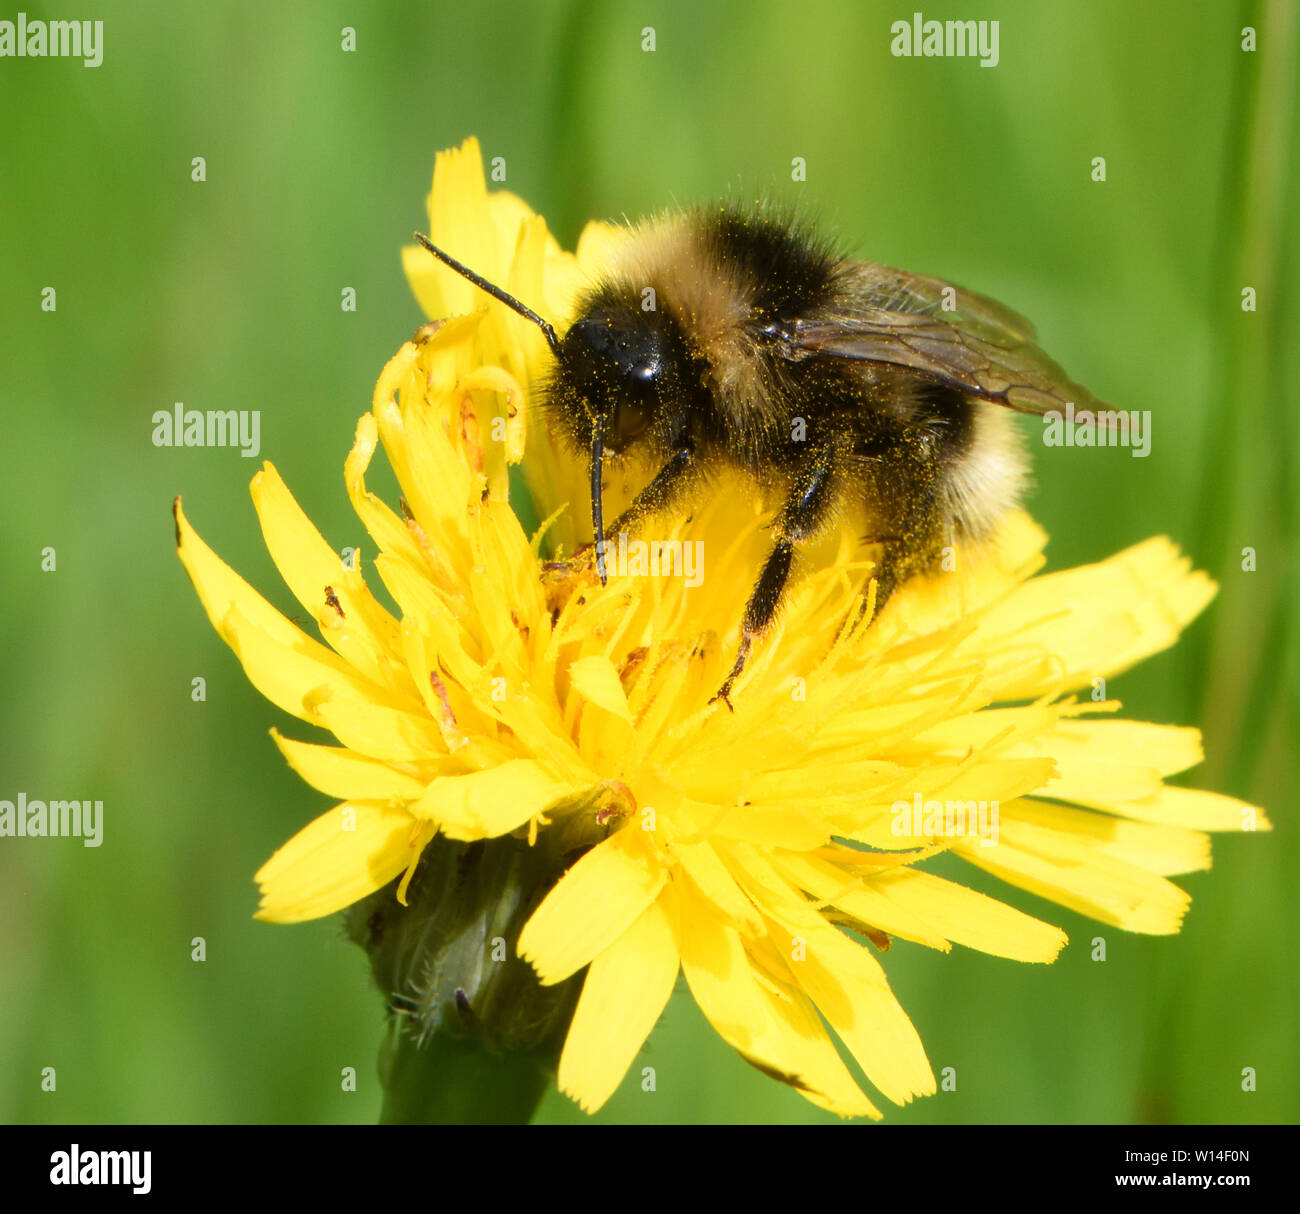 A worker buff-tailed bumblebee (Bombus terrestris) foraging on a yellow flower of mouse-ear hawkweed (Pilosella officinarum, Hieracium pilosella). Bed Stock Photo